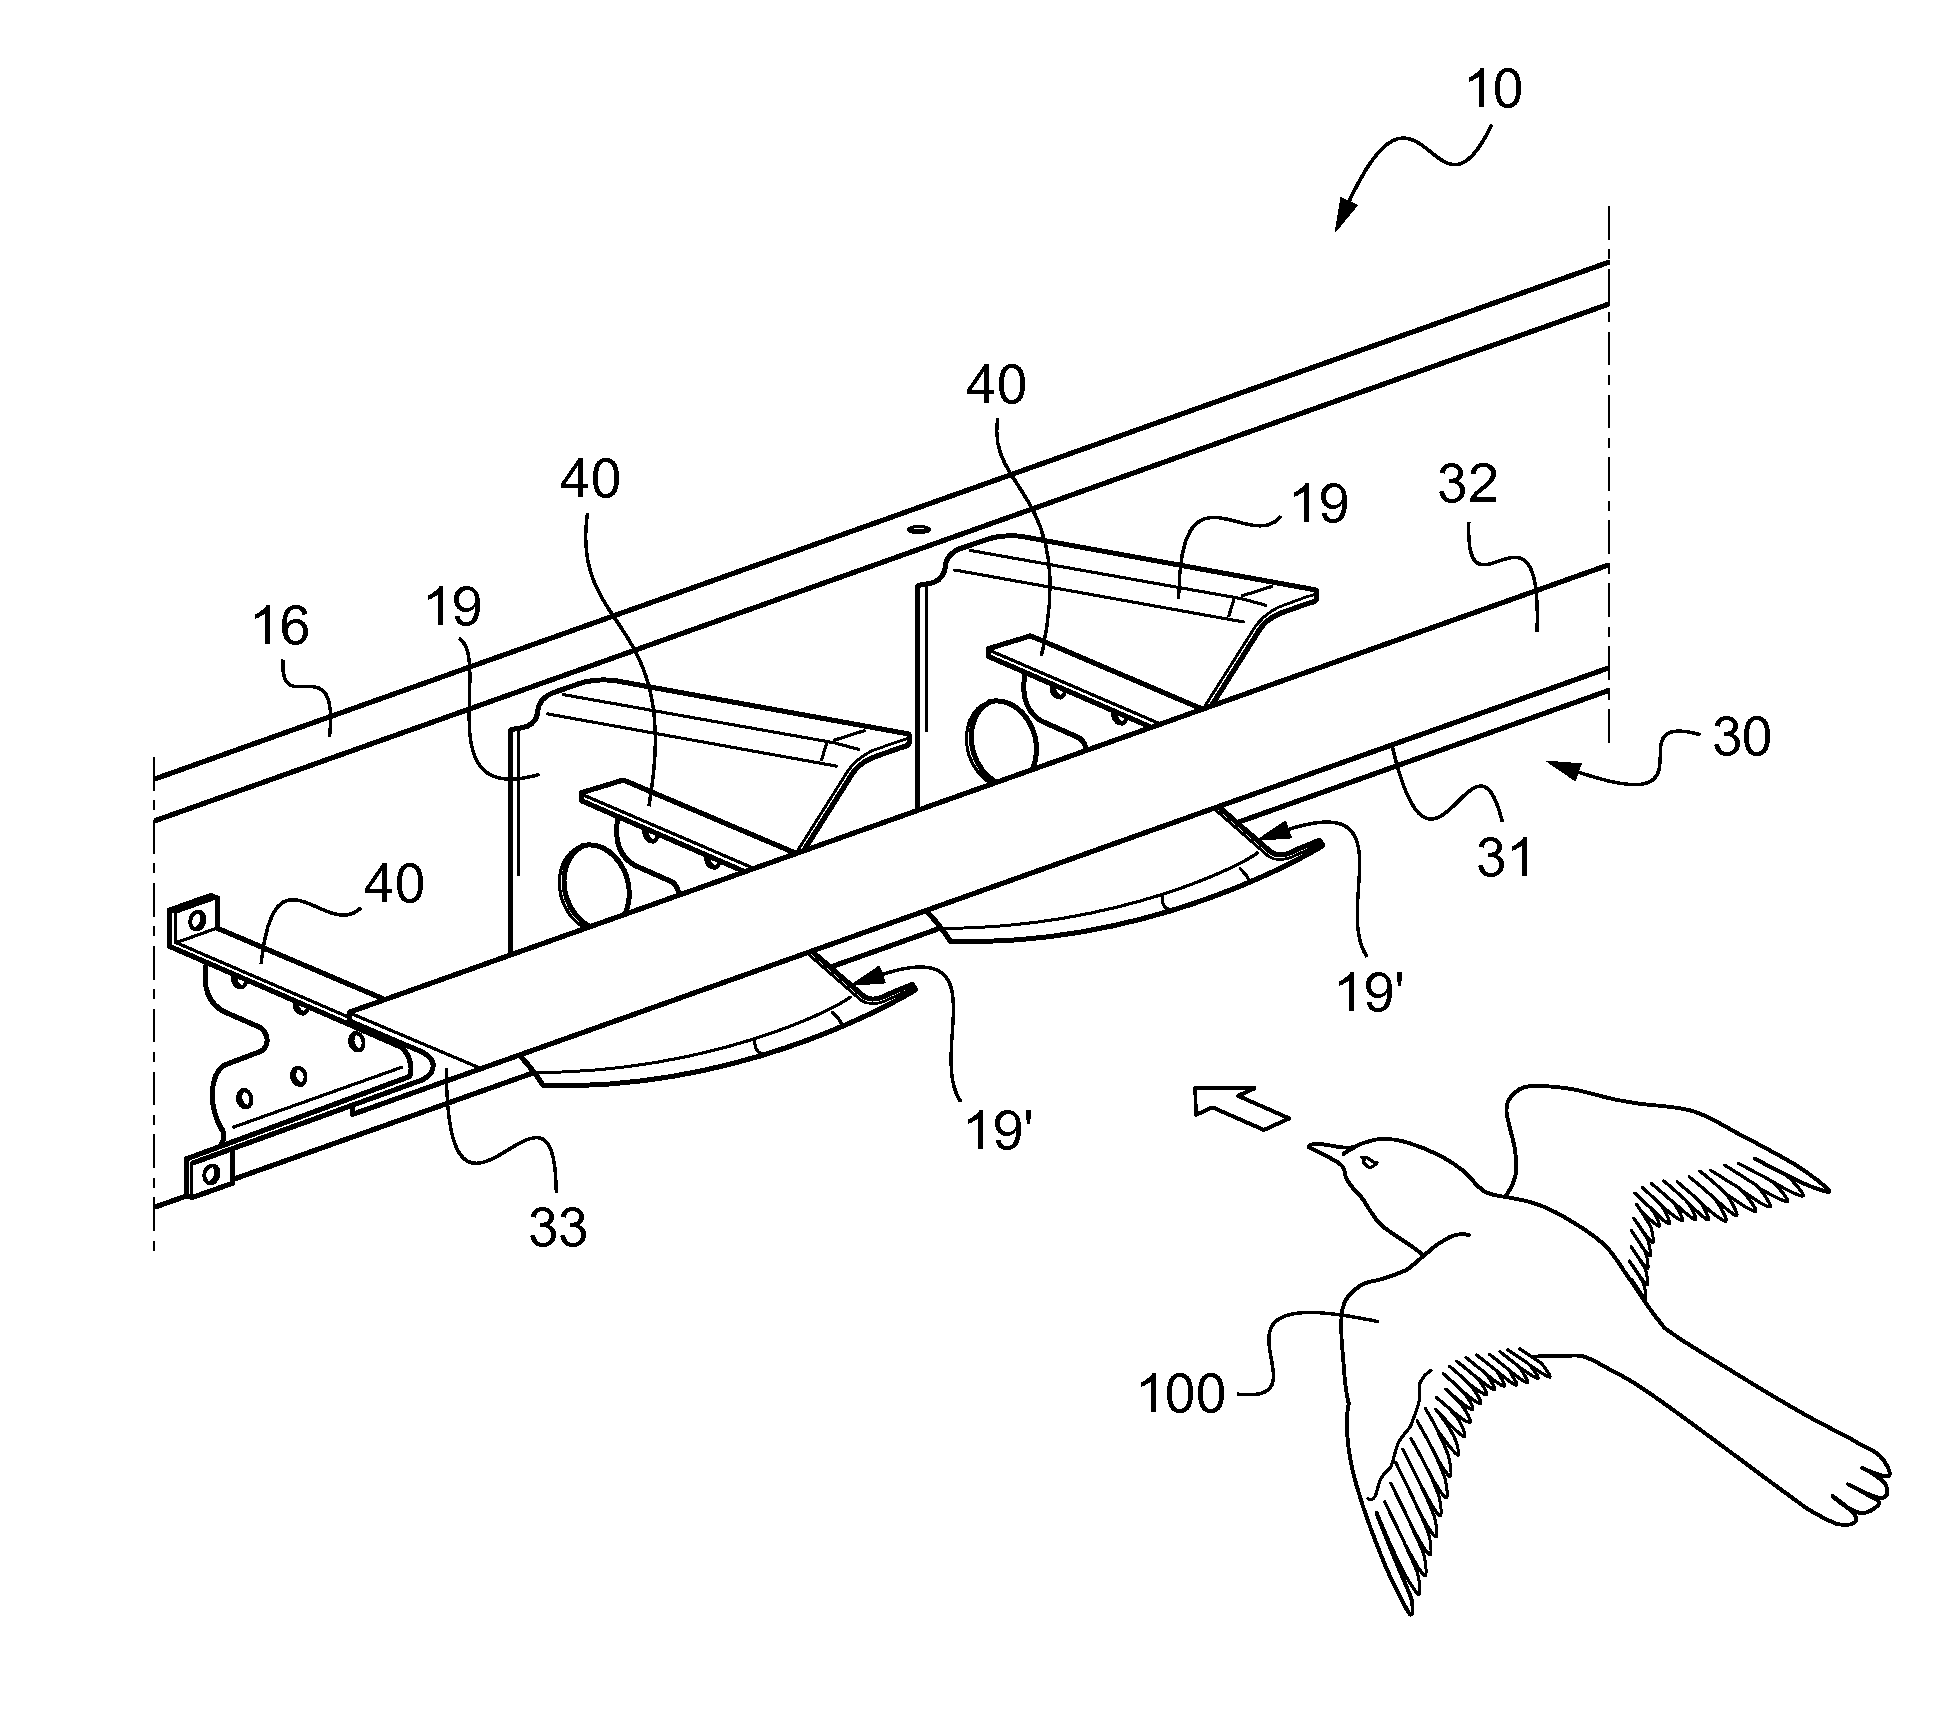 Aircraft airfoil, and an aircraft provided with such an airfoil